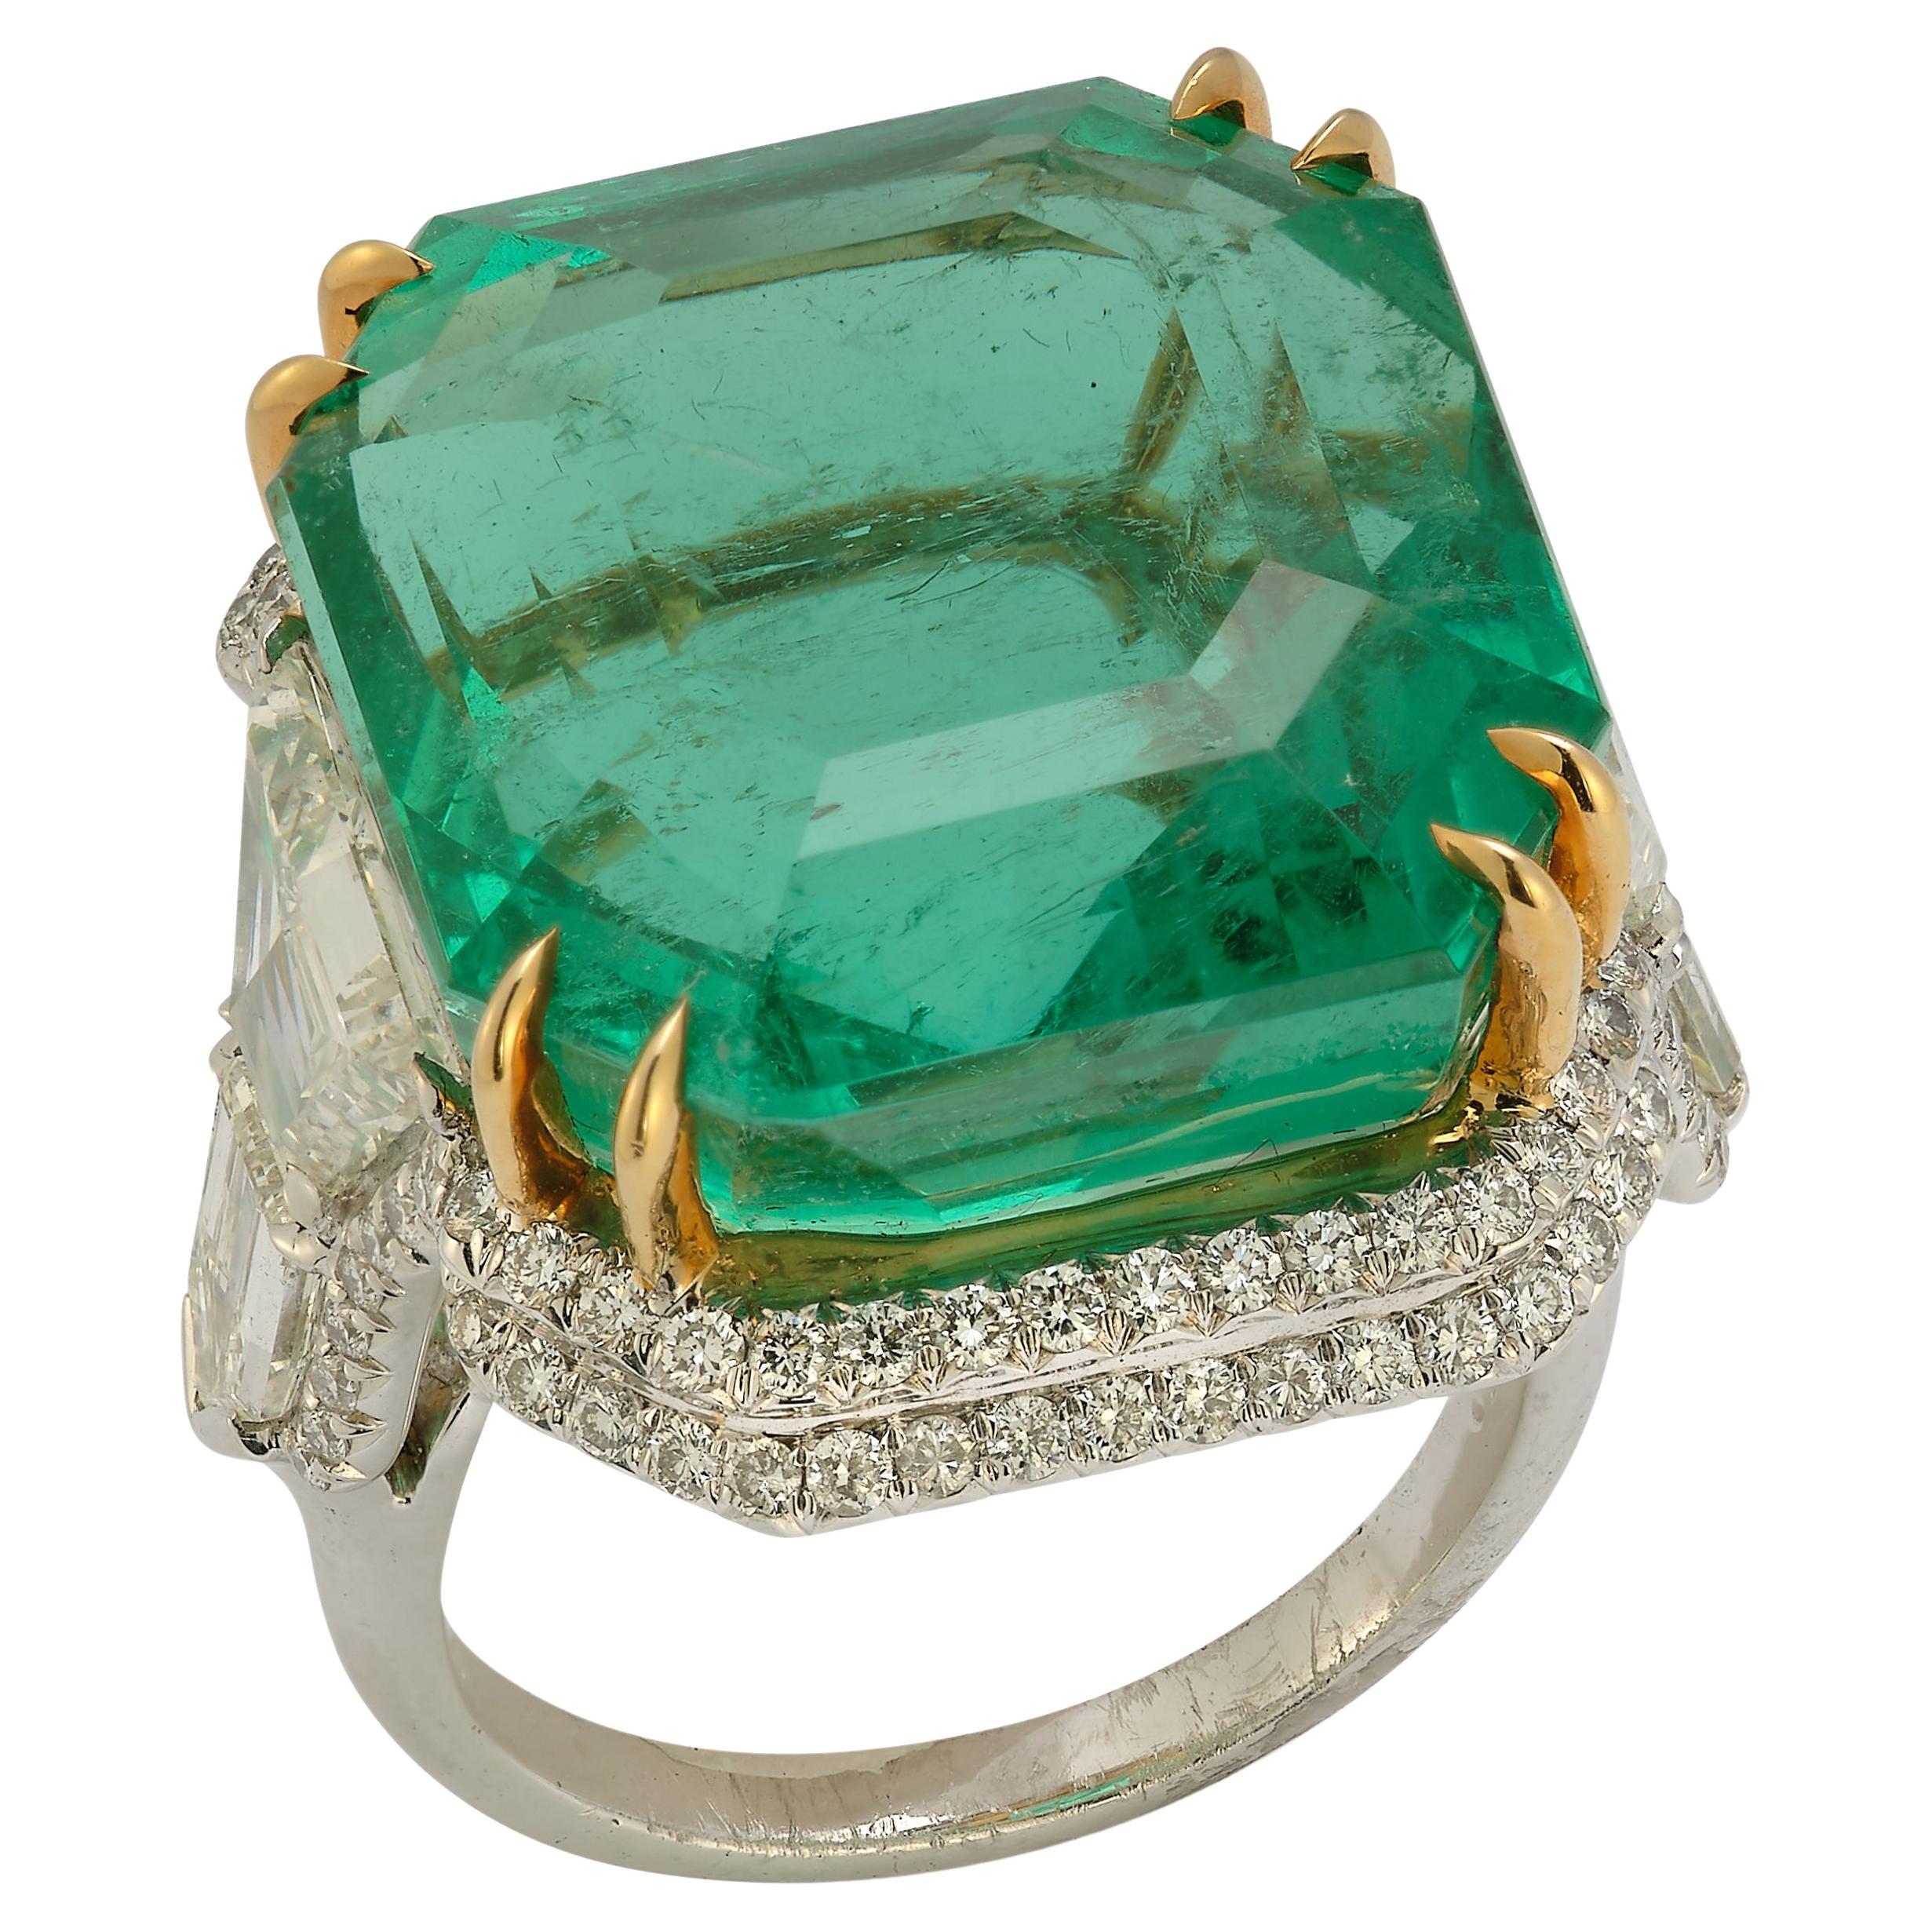 31.49 Carat Colombian Emerald Ring For Sale